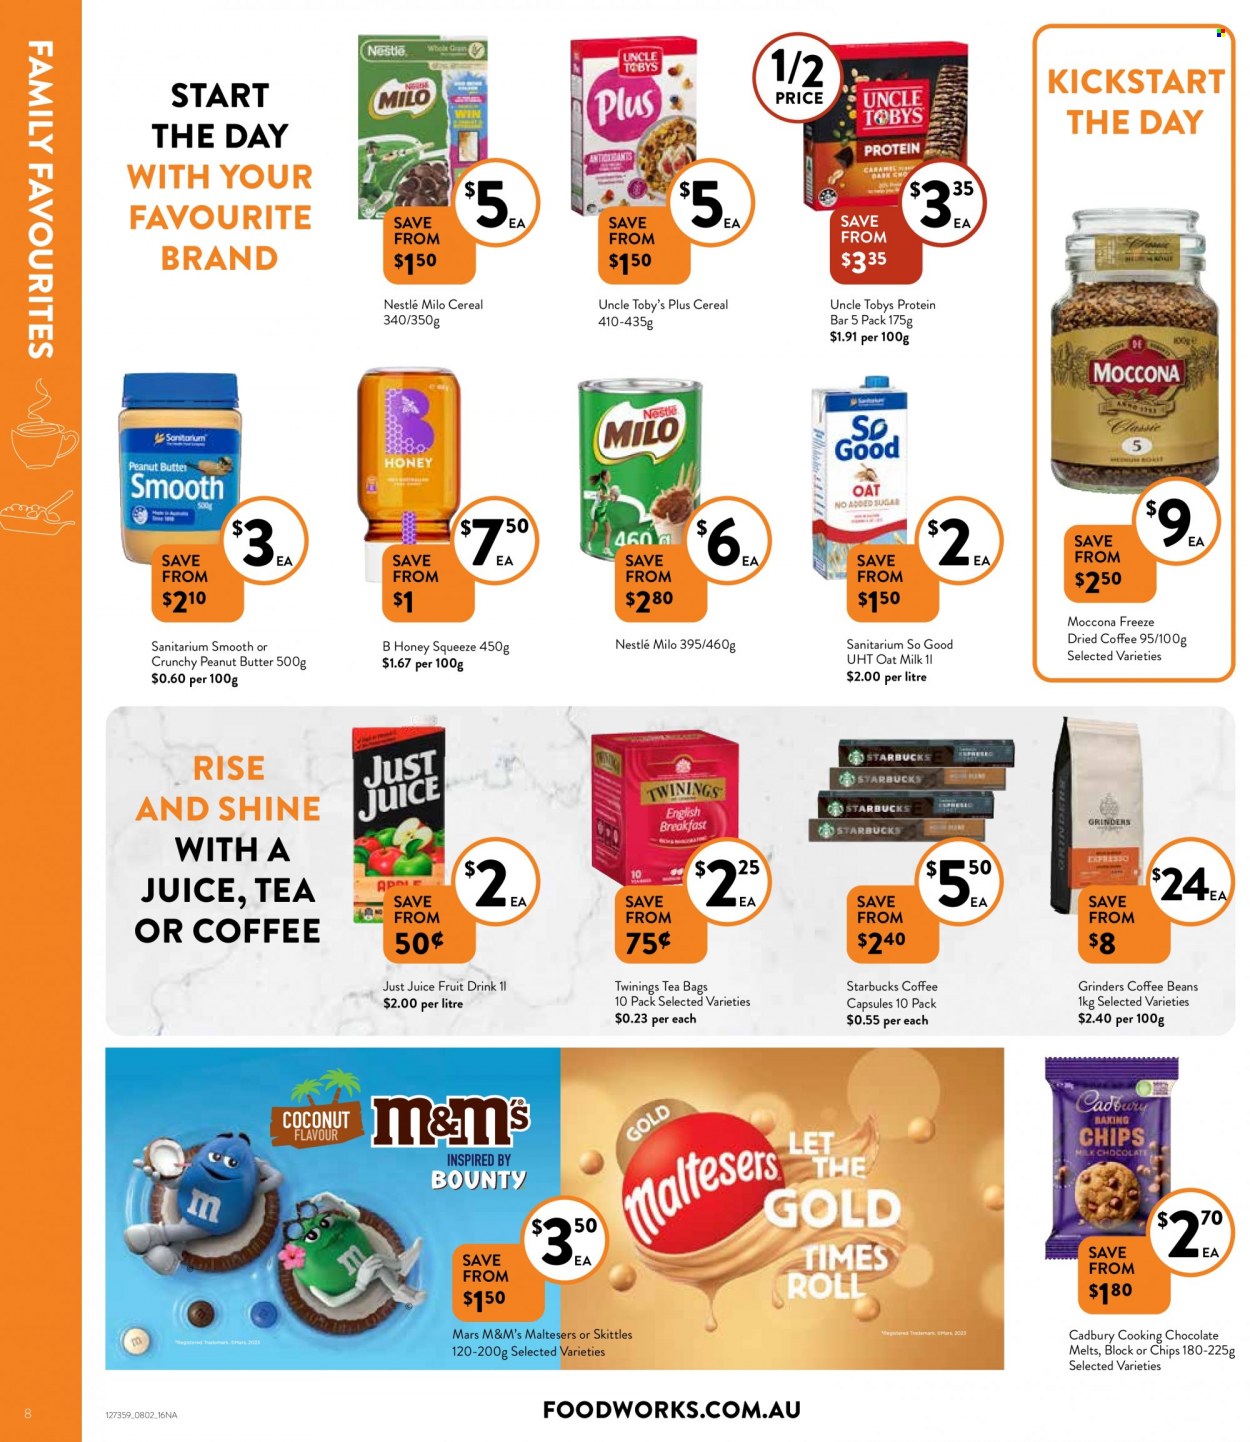 thumbnail - Foodworks Catalogue - 8 Feb 2023 - 14 Feb 2023 - Sales products - Milo, oat milk, milk chocolate, Nestlé, chocolate, Bounty, Mars, M&M's, Maltesers, Cadbury, Skittles, baking chips, cereals, protein bar, honey, peanut butter, juice, fruit drink, tea bags, Twinings, Moccona, coffee capsules, Starbucks. Page 8.